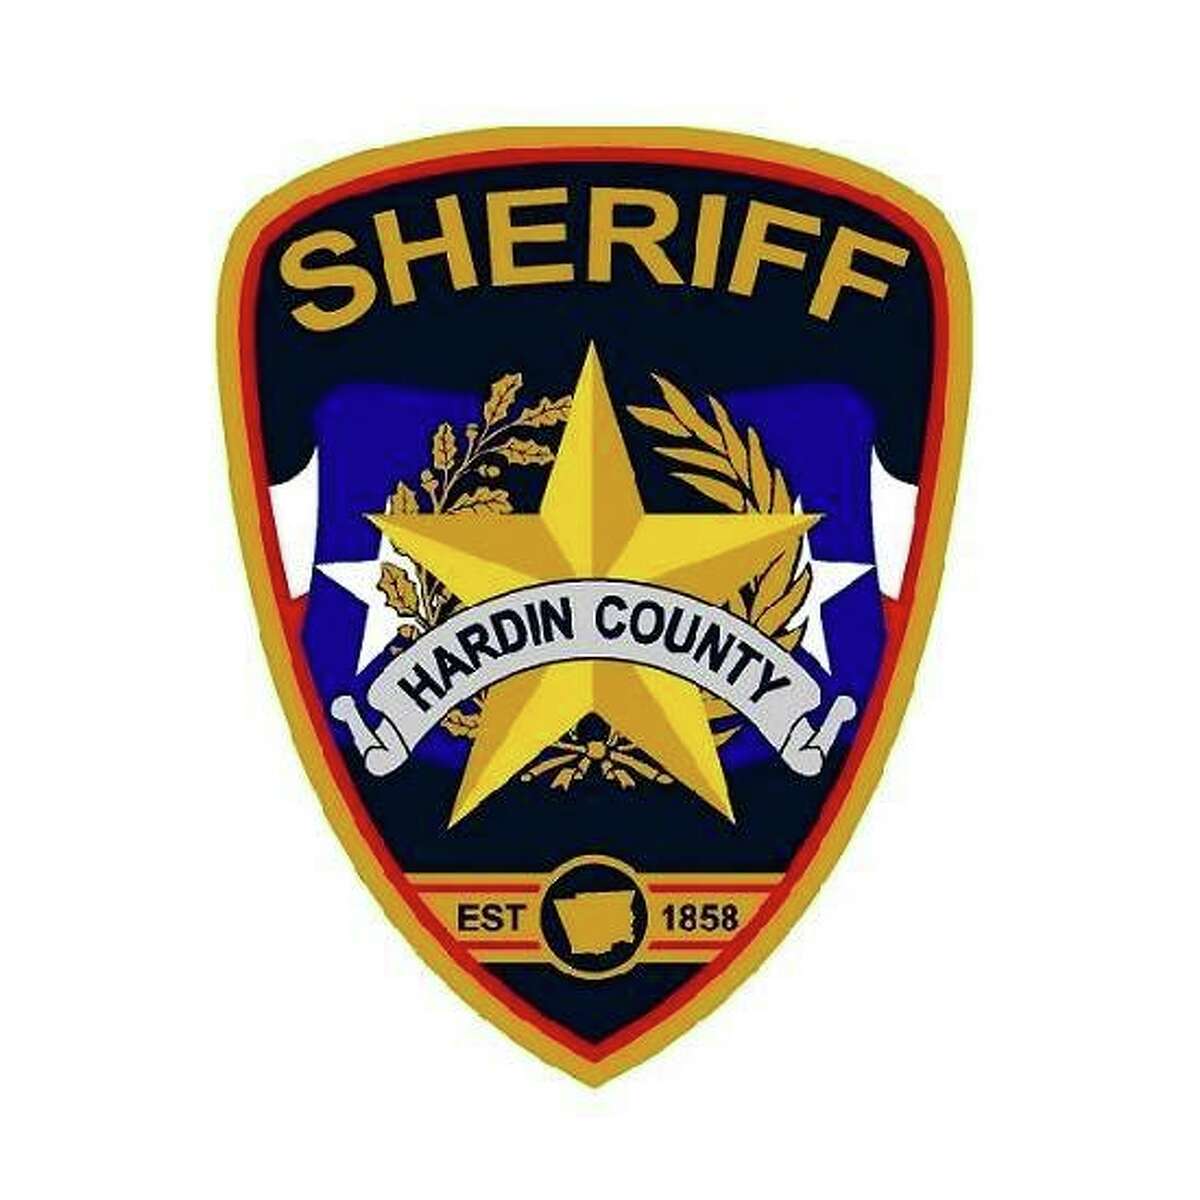 Hardin County Sheriff's Office has reported a drowning.